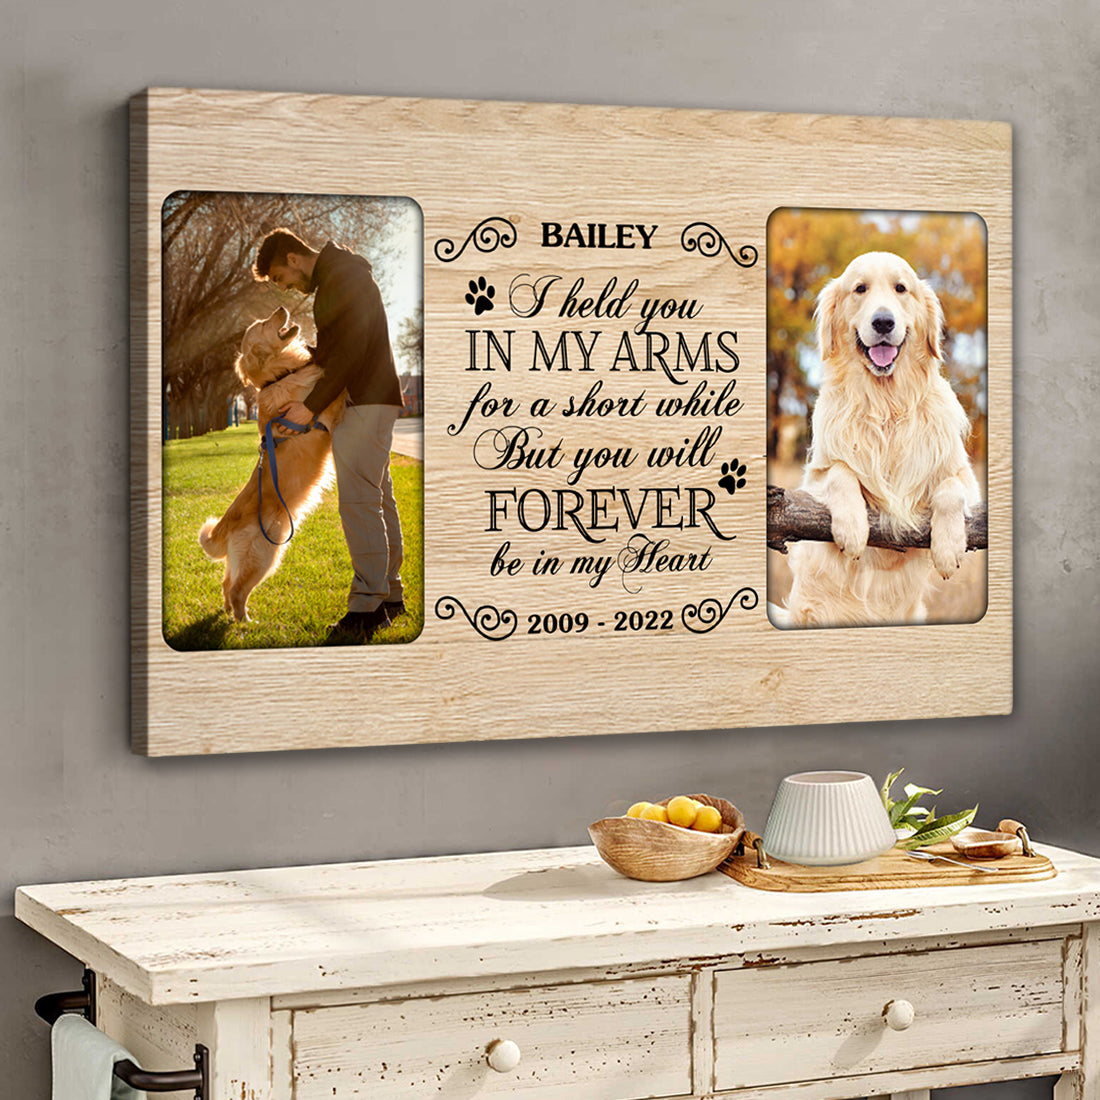 I held you in my arms - Personalized Pet Photo Canvas AK